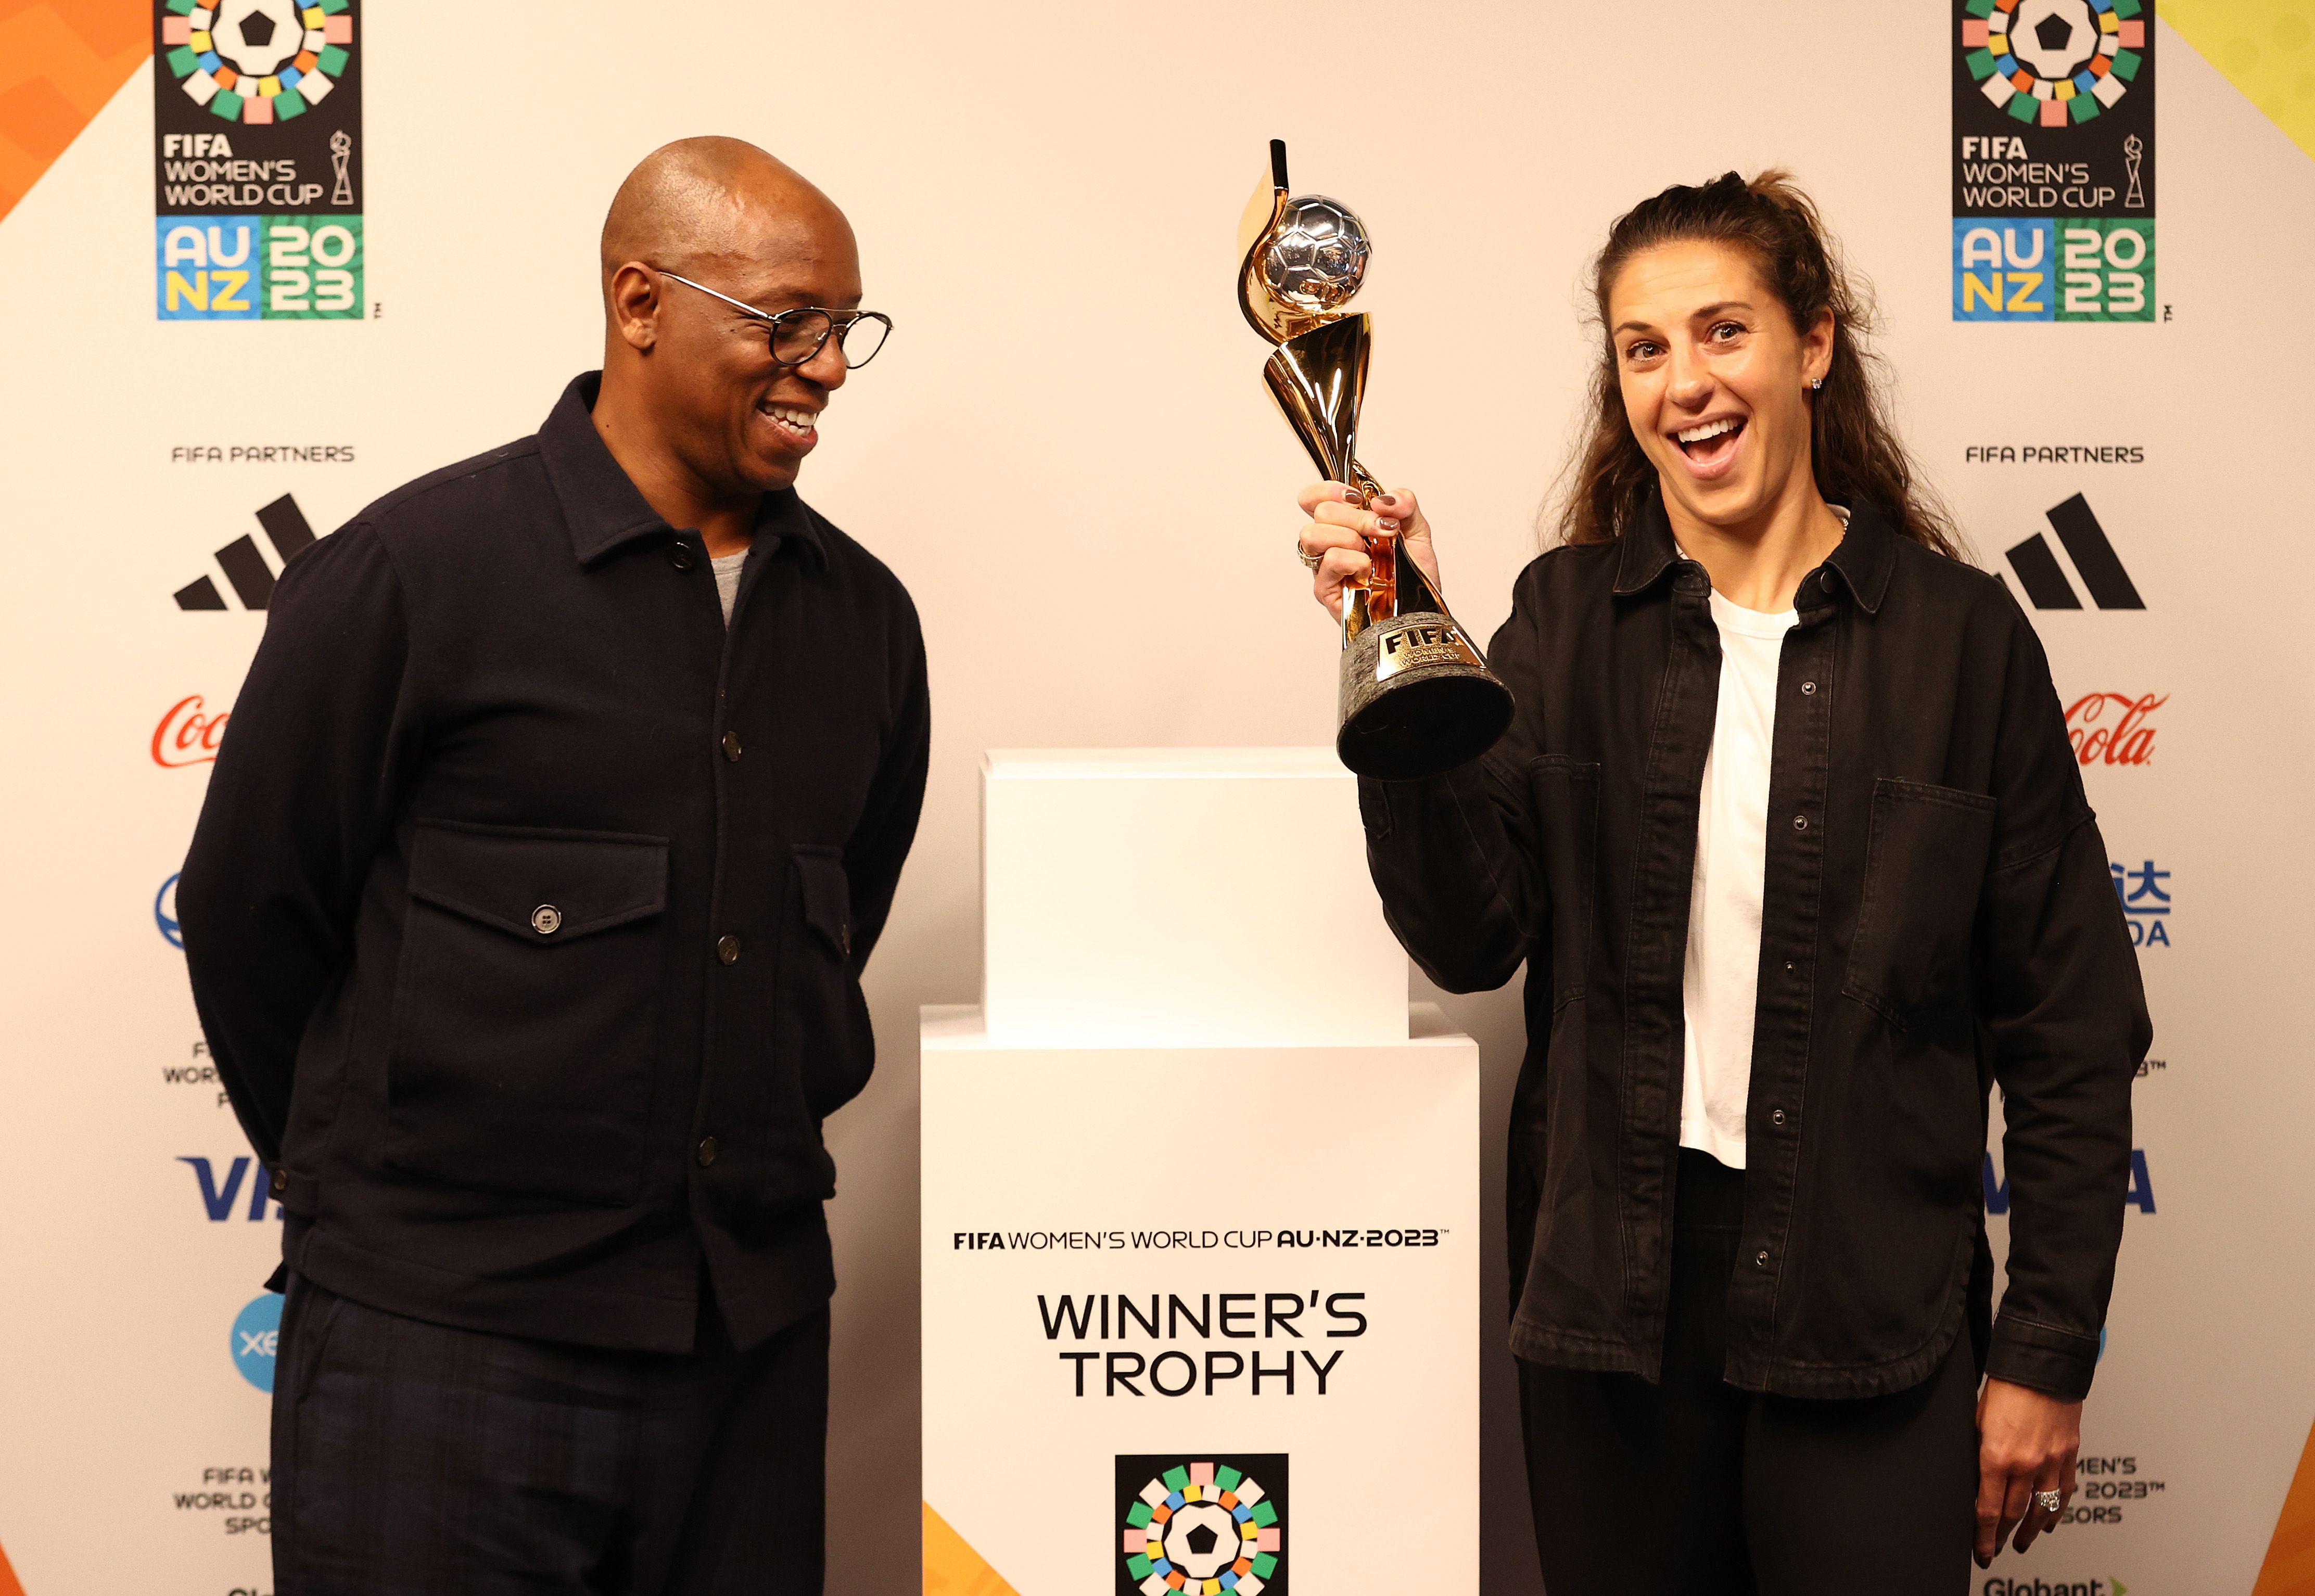 Ian Wright and Carli Lloyd with the Women's World Cup trophy